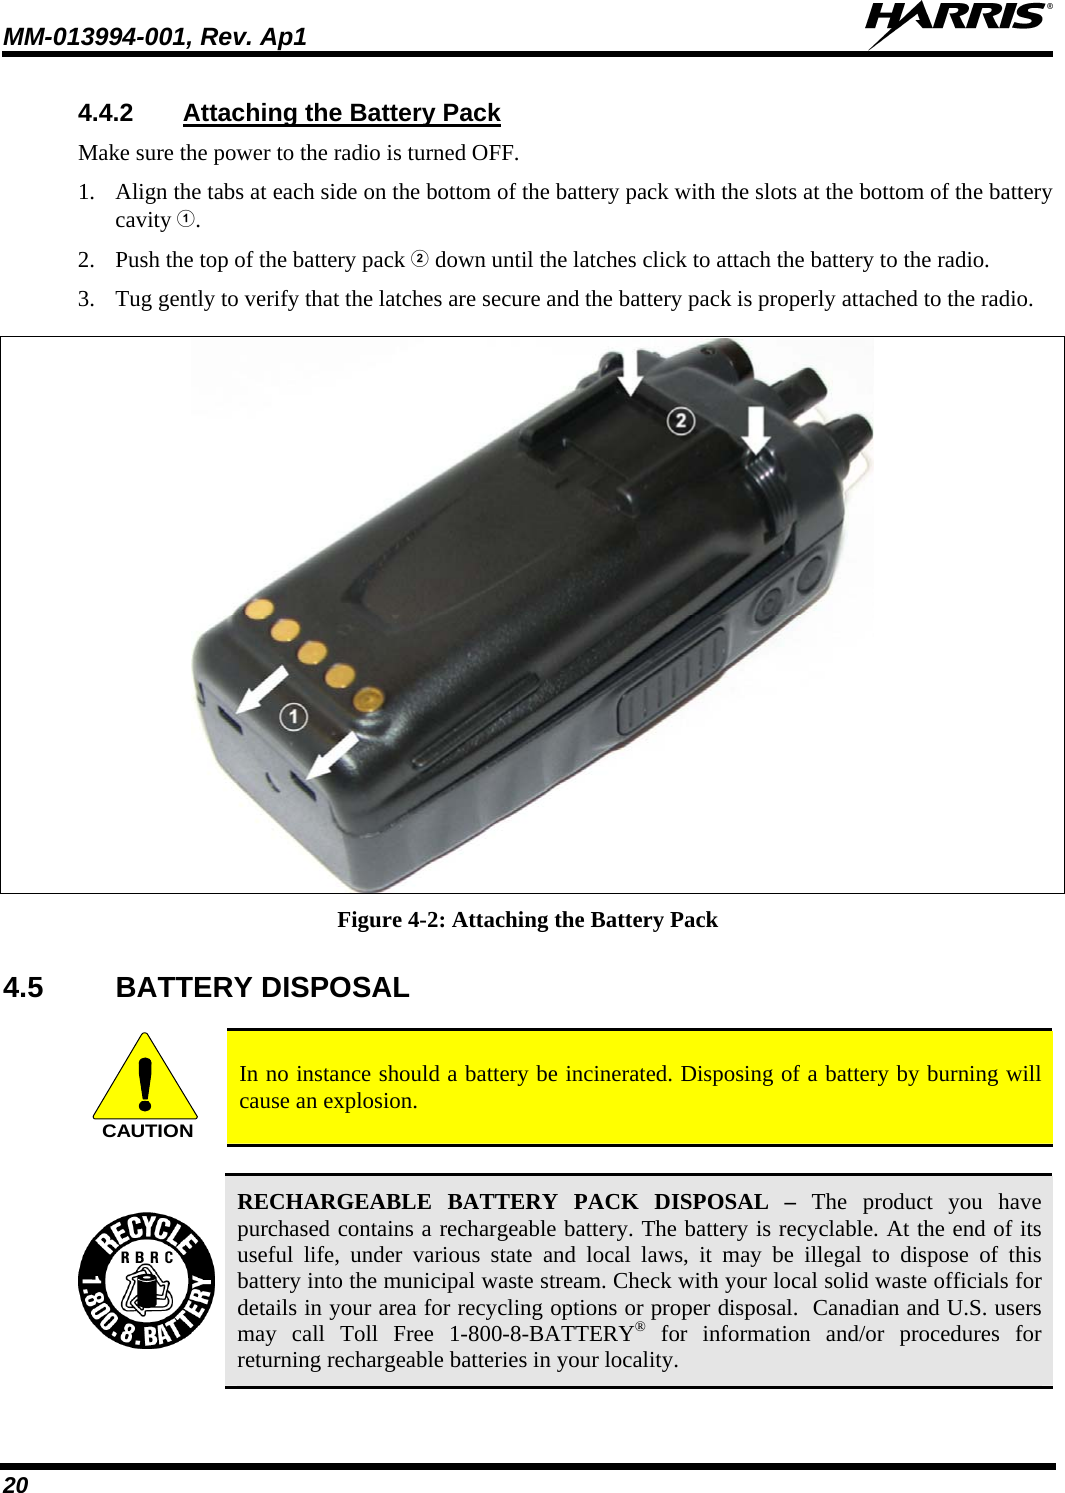 MM-013994-001, Rev. Ap1  20 4.4.2  Attaching the Battery Pack Make sure the power to the radio is turned OFF. 1. Align the tabs at each side on the bottom of the battery pack with the slots at the bottom of the battery cavity . 2. Push the top of the battery pack  down until the latches click to attach the battery to the radio. 3. Tug gently to verify that the latches are secure and the battery pack is properly attached to the radio.   Figure 4-2: Attaching the Battery Pack 4.5 BATTERY DISPOSAL  CAUTION In no instance should a battery be incinerated. Disposing of a battery by burning will cause an explosion.   RECHARGEABLE BATTERY PACK DISPOSAL – The product you have purchased contains a rechargeable battery. The battery is recyclable. At the end of its useful life, under various state and local laws, it may be illegal to dispose of this battery into the municipal waste stream. Check with your local solid waste officials for details in your area for recycling options or proper disposal.  Canadian and U.S. users may call Toll Free 1-800-8-BATTERY® for information and/or procedures for returning rechargeable batteries in your locality. 